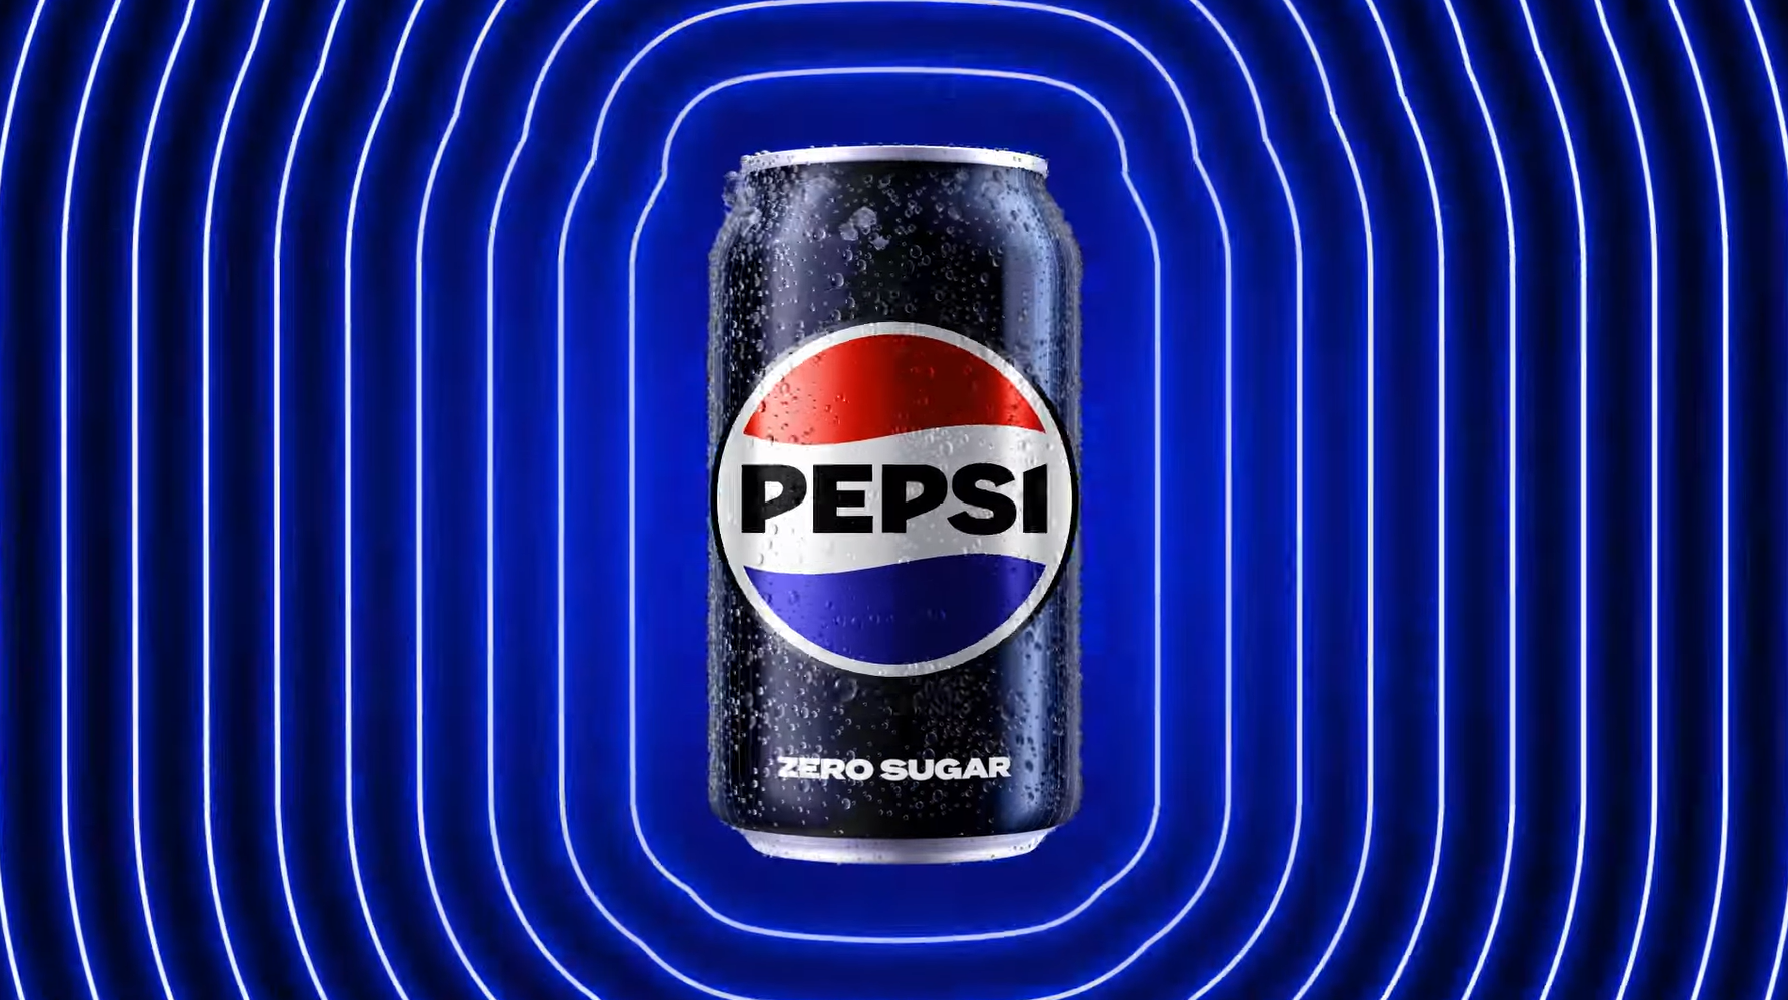 Pepsi refreshes logo for first time in 14 years - Grocery Gazette ...